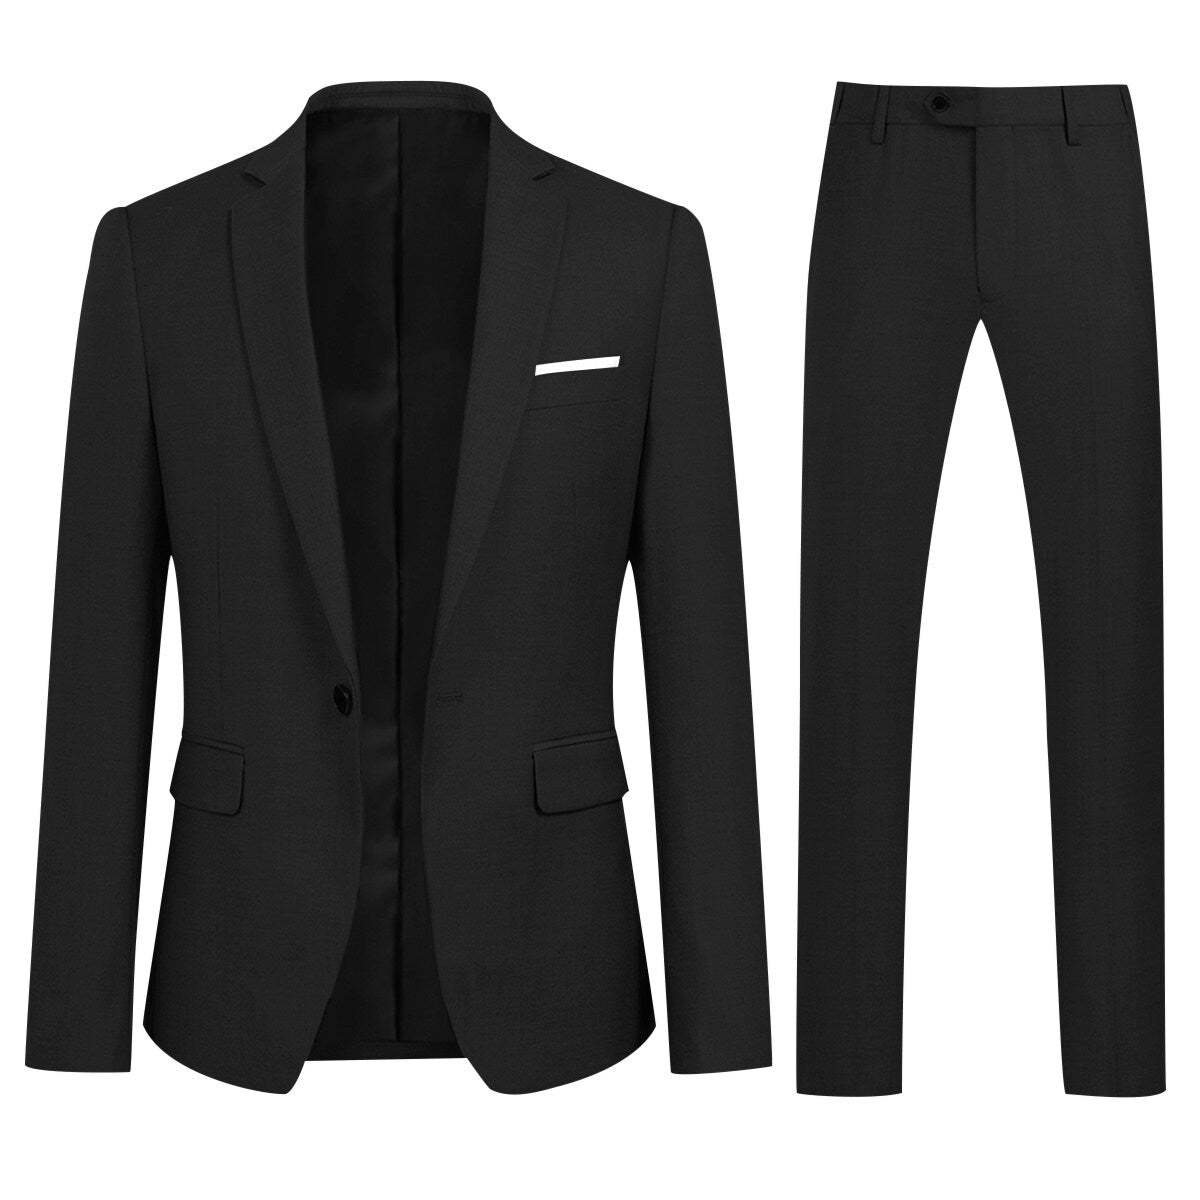 The Anything-But-Basic Black Suit (And How to Make It Your Own) | by Karako  Suits | Medium